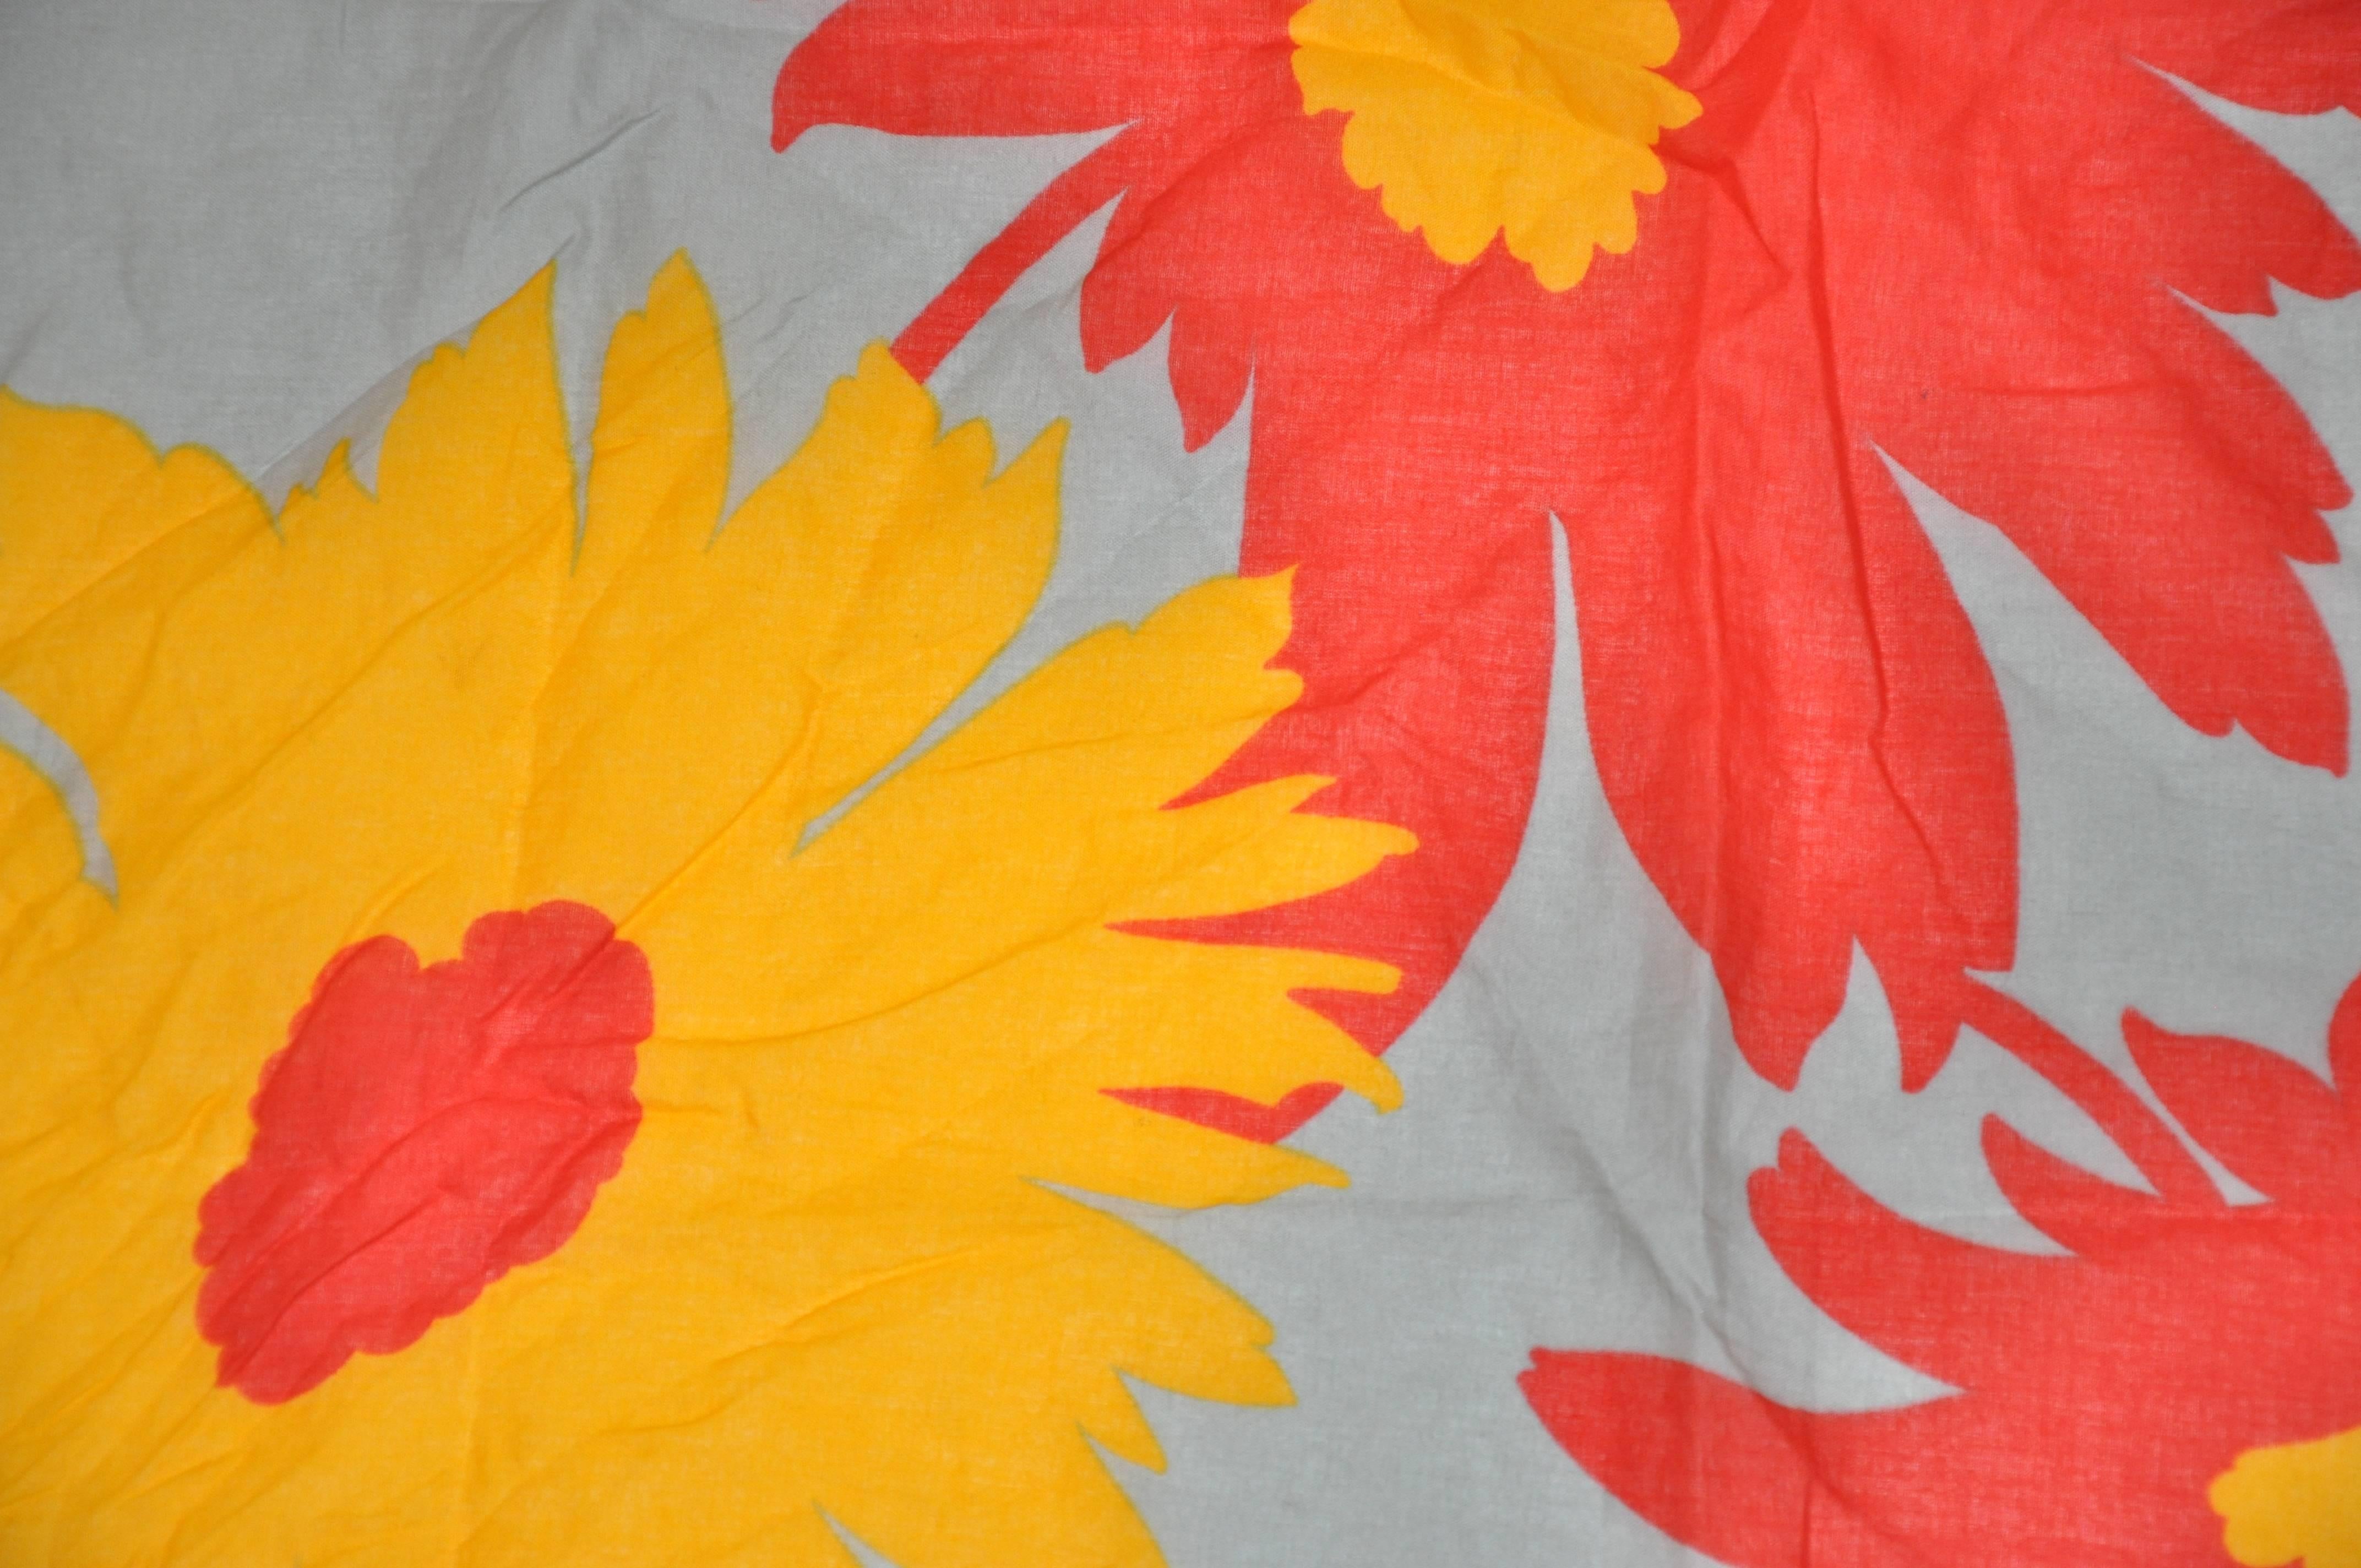 This wonderfully detailed large yellow & red floral accented with yellow border 100% cotton scarf from Italy measures 34